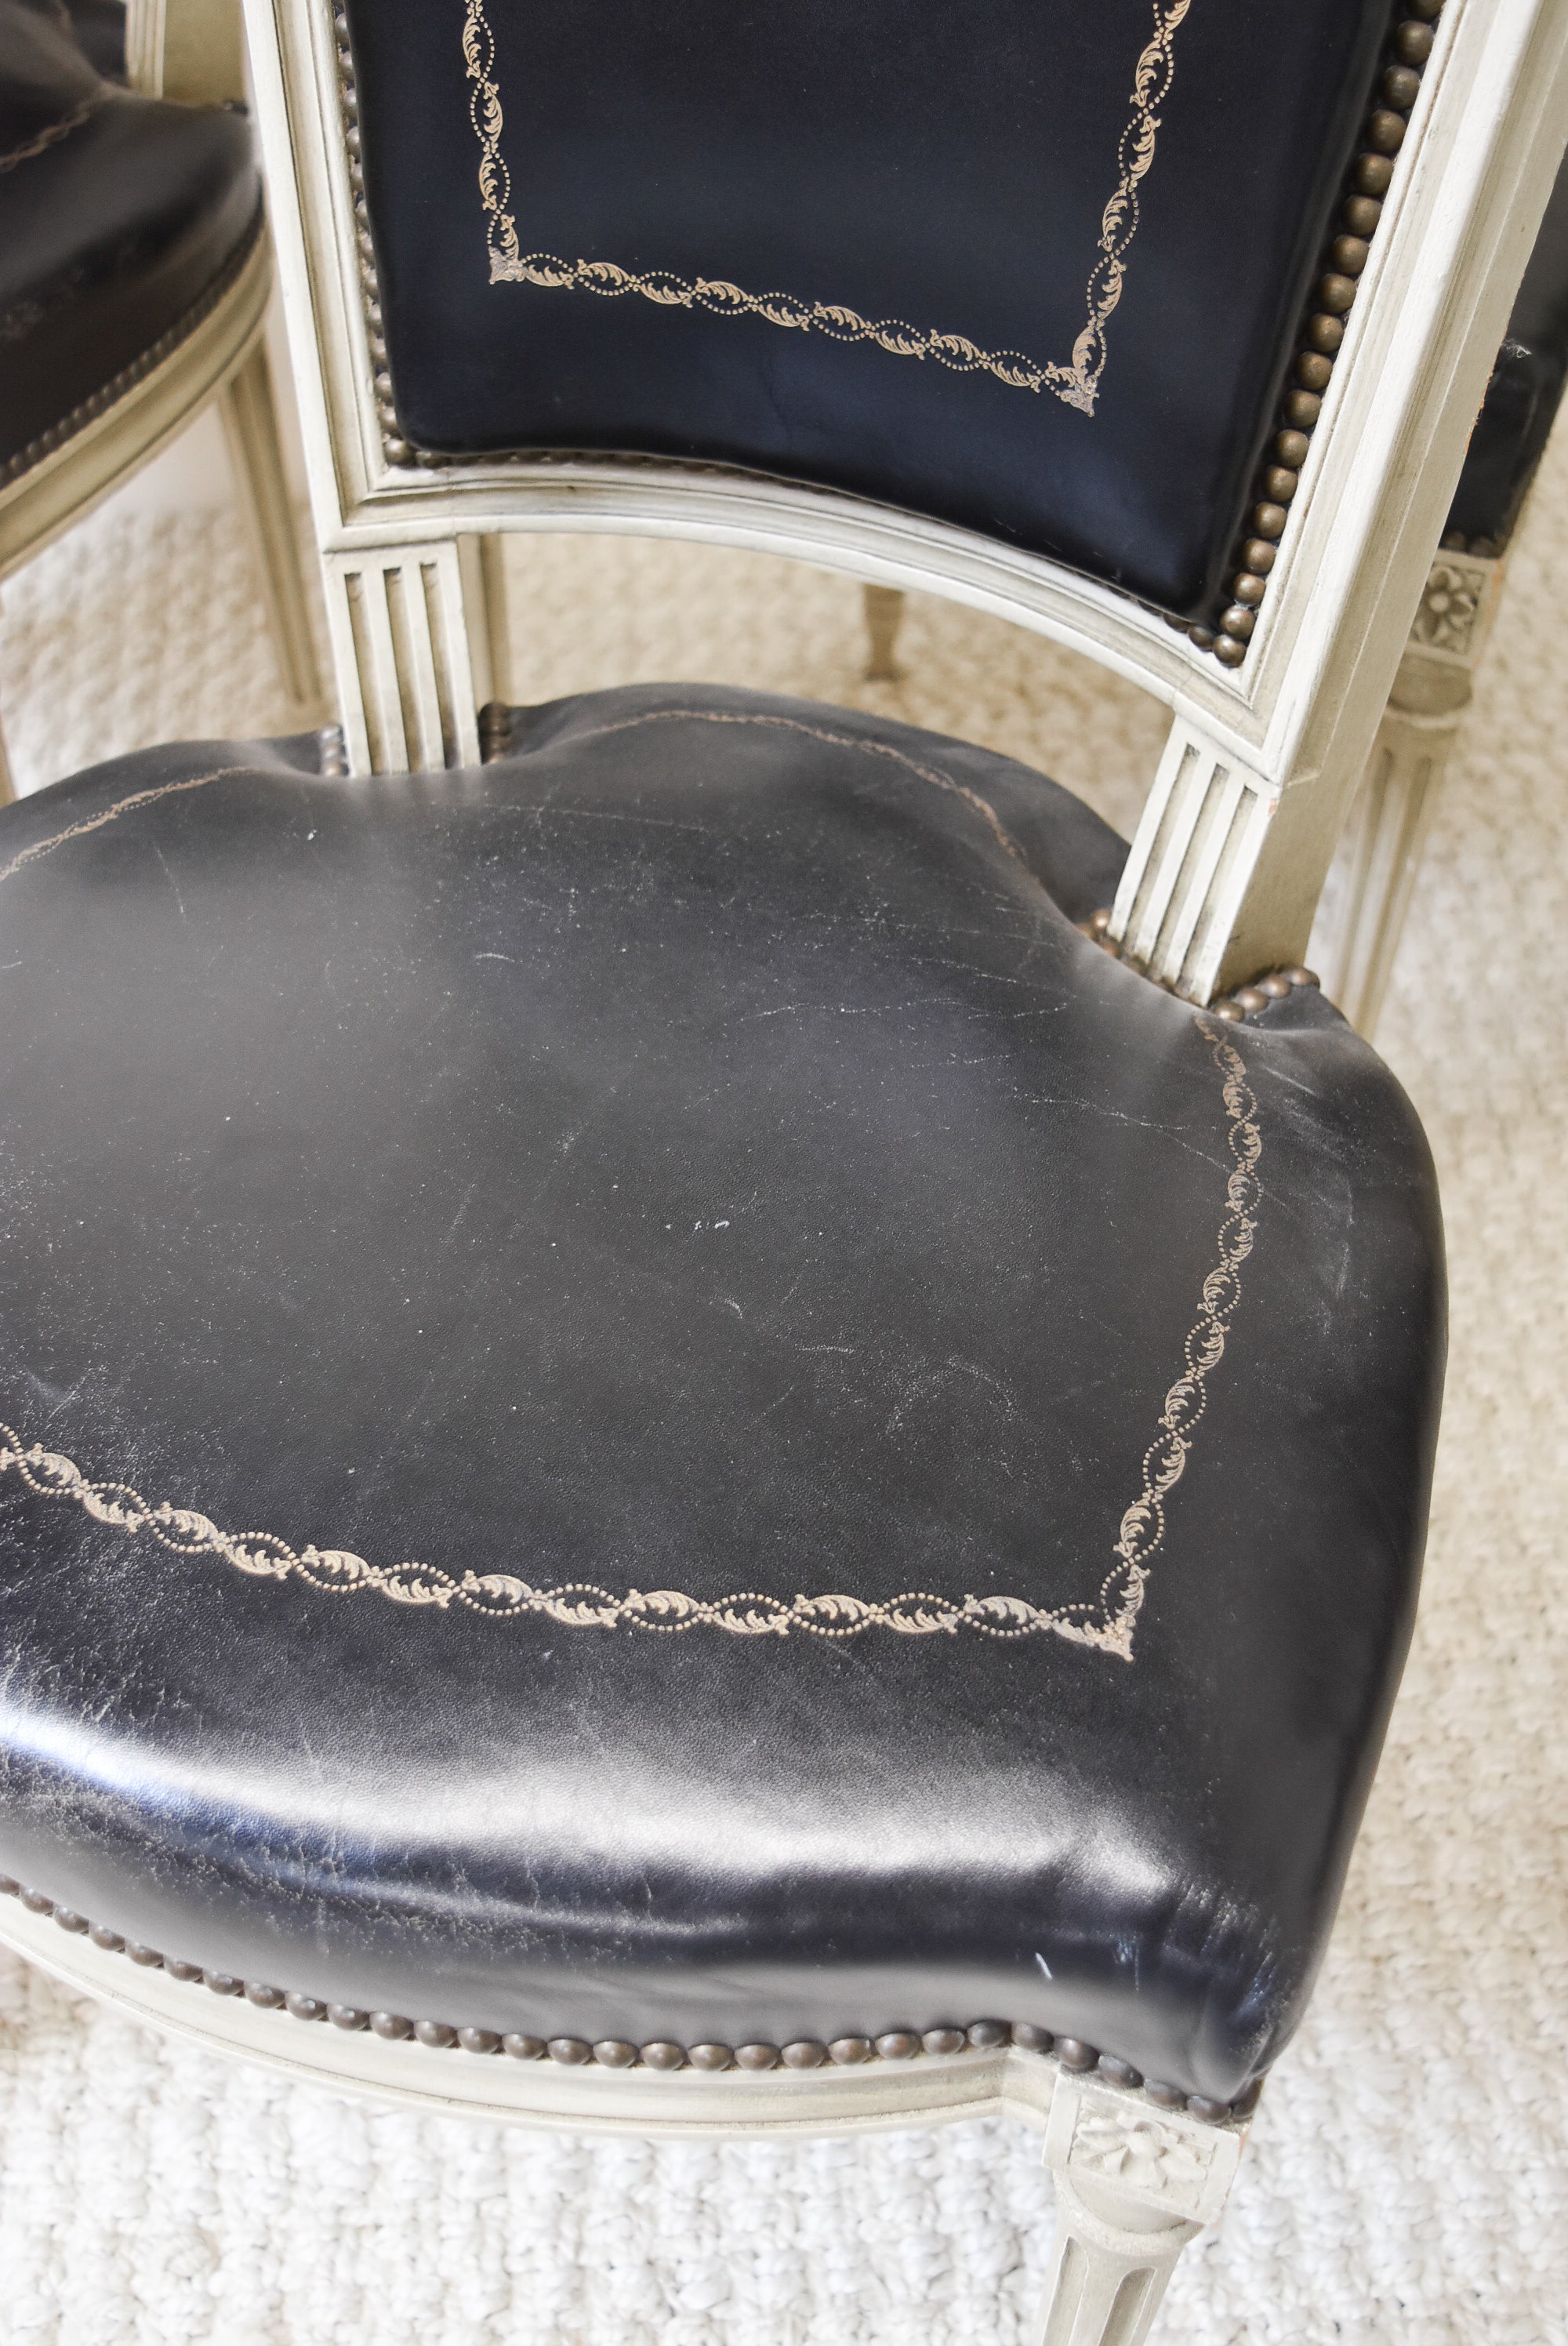 Set of 6 Painted Black Leather Upholstered Dining Chairs In the Louis XVI Style